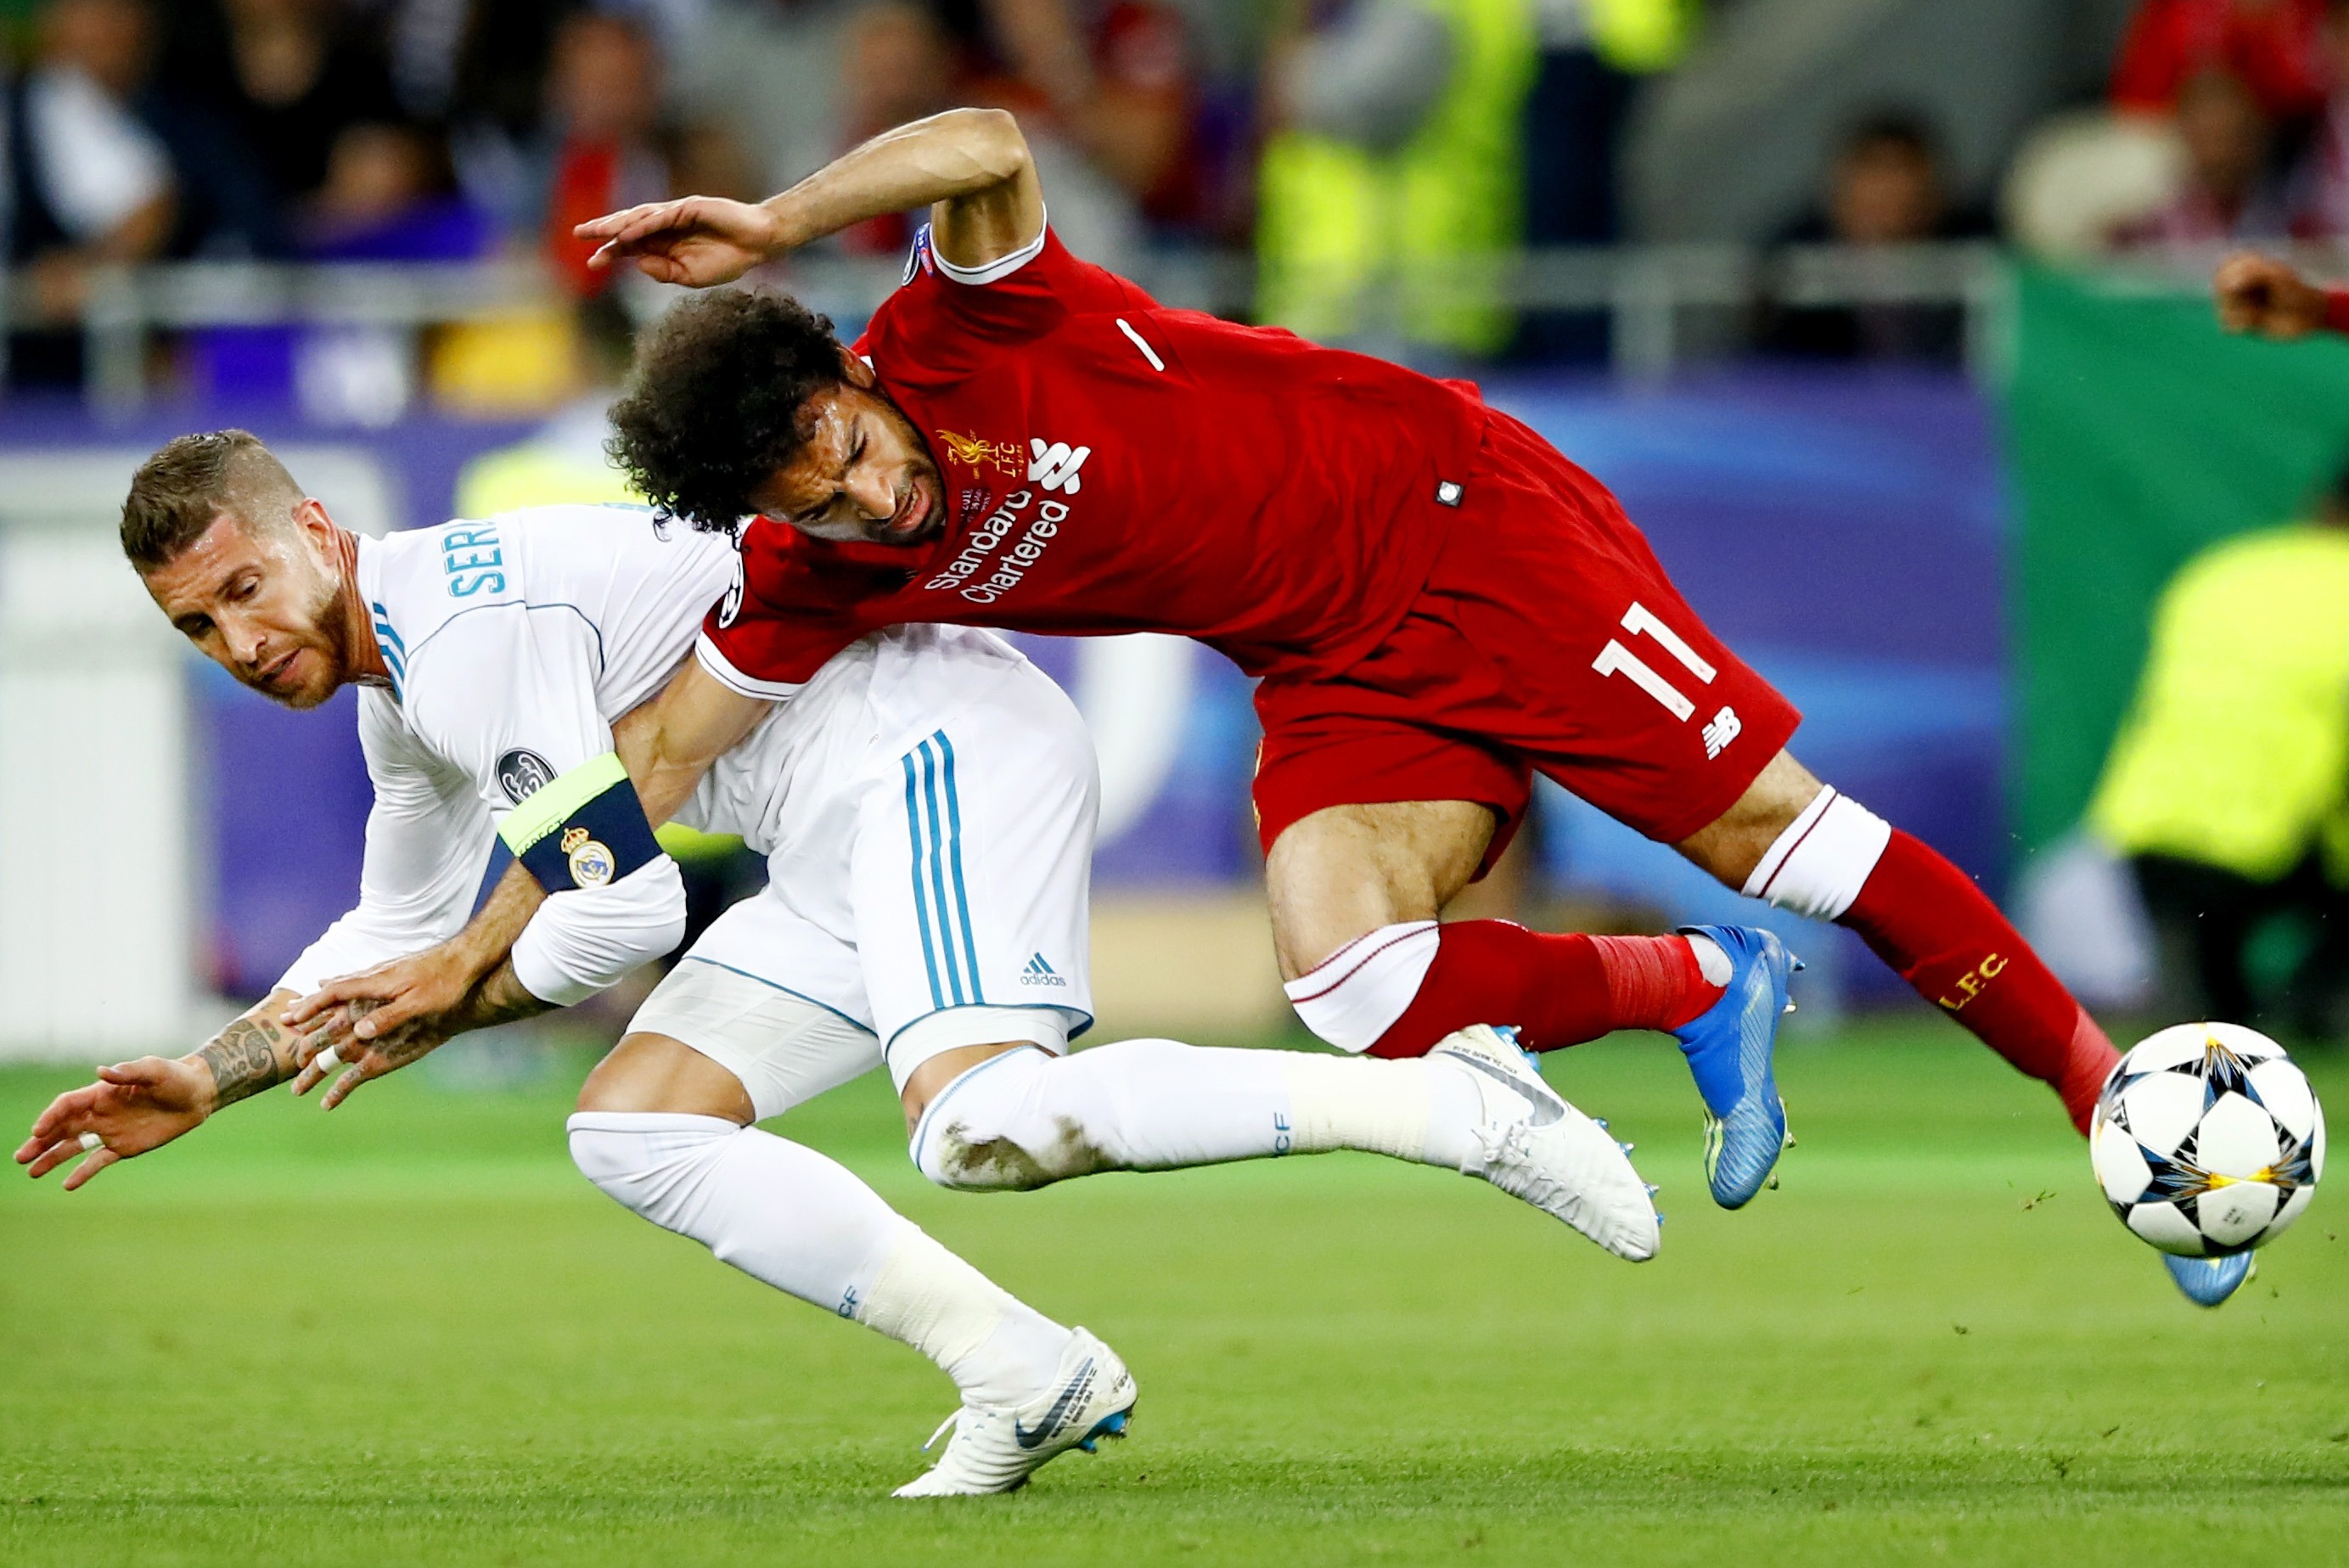 UEFA Champions League Finals: Liverpool vs Real Madrid Champions League Final still few weeks away but Mo Salah announce “We have a SCORE to settle'